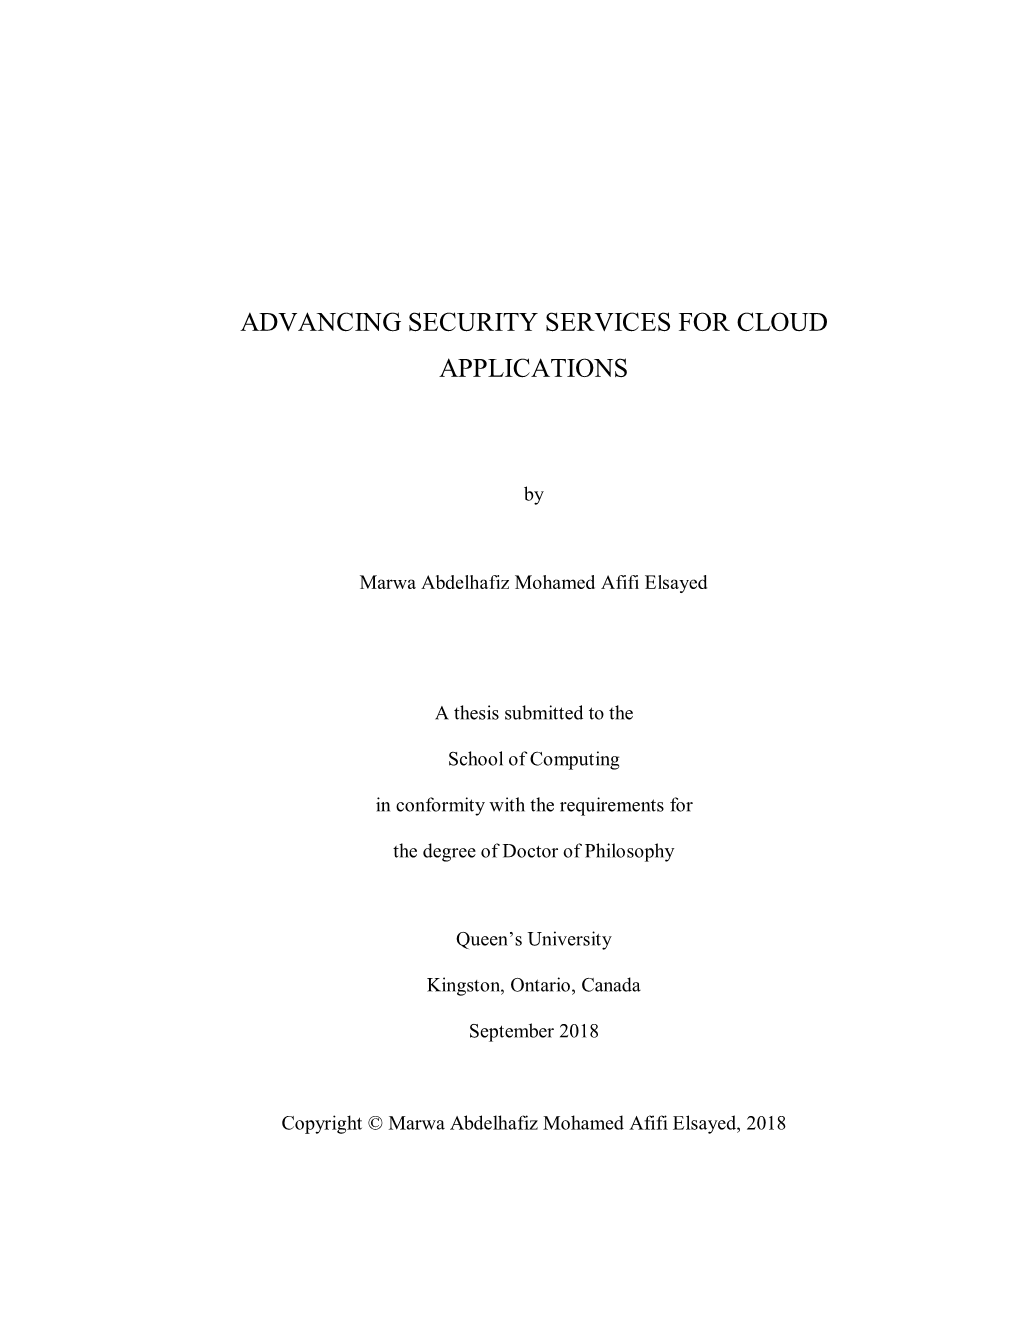 Advancing Security Services for Cloud Applications